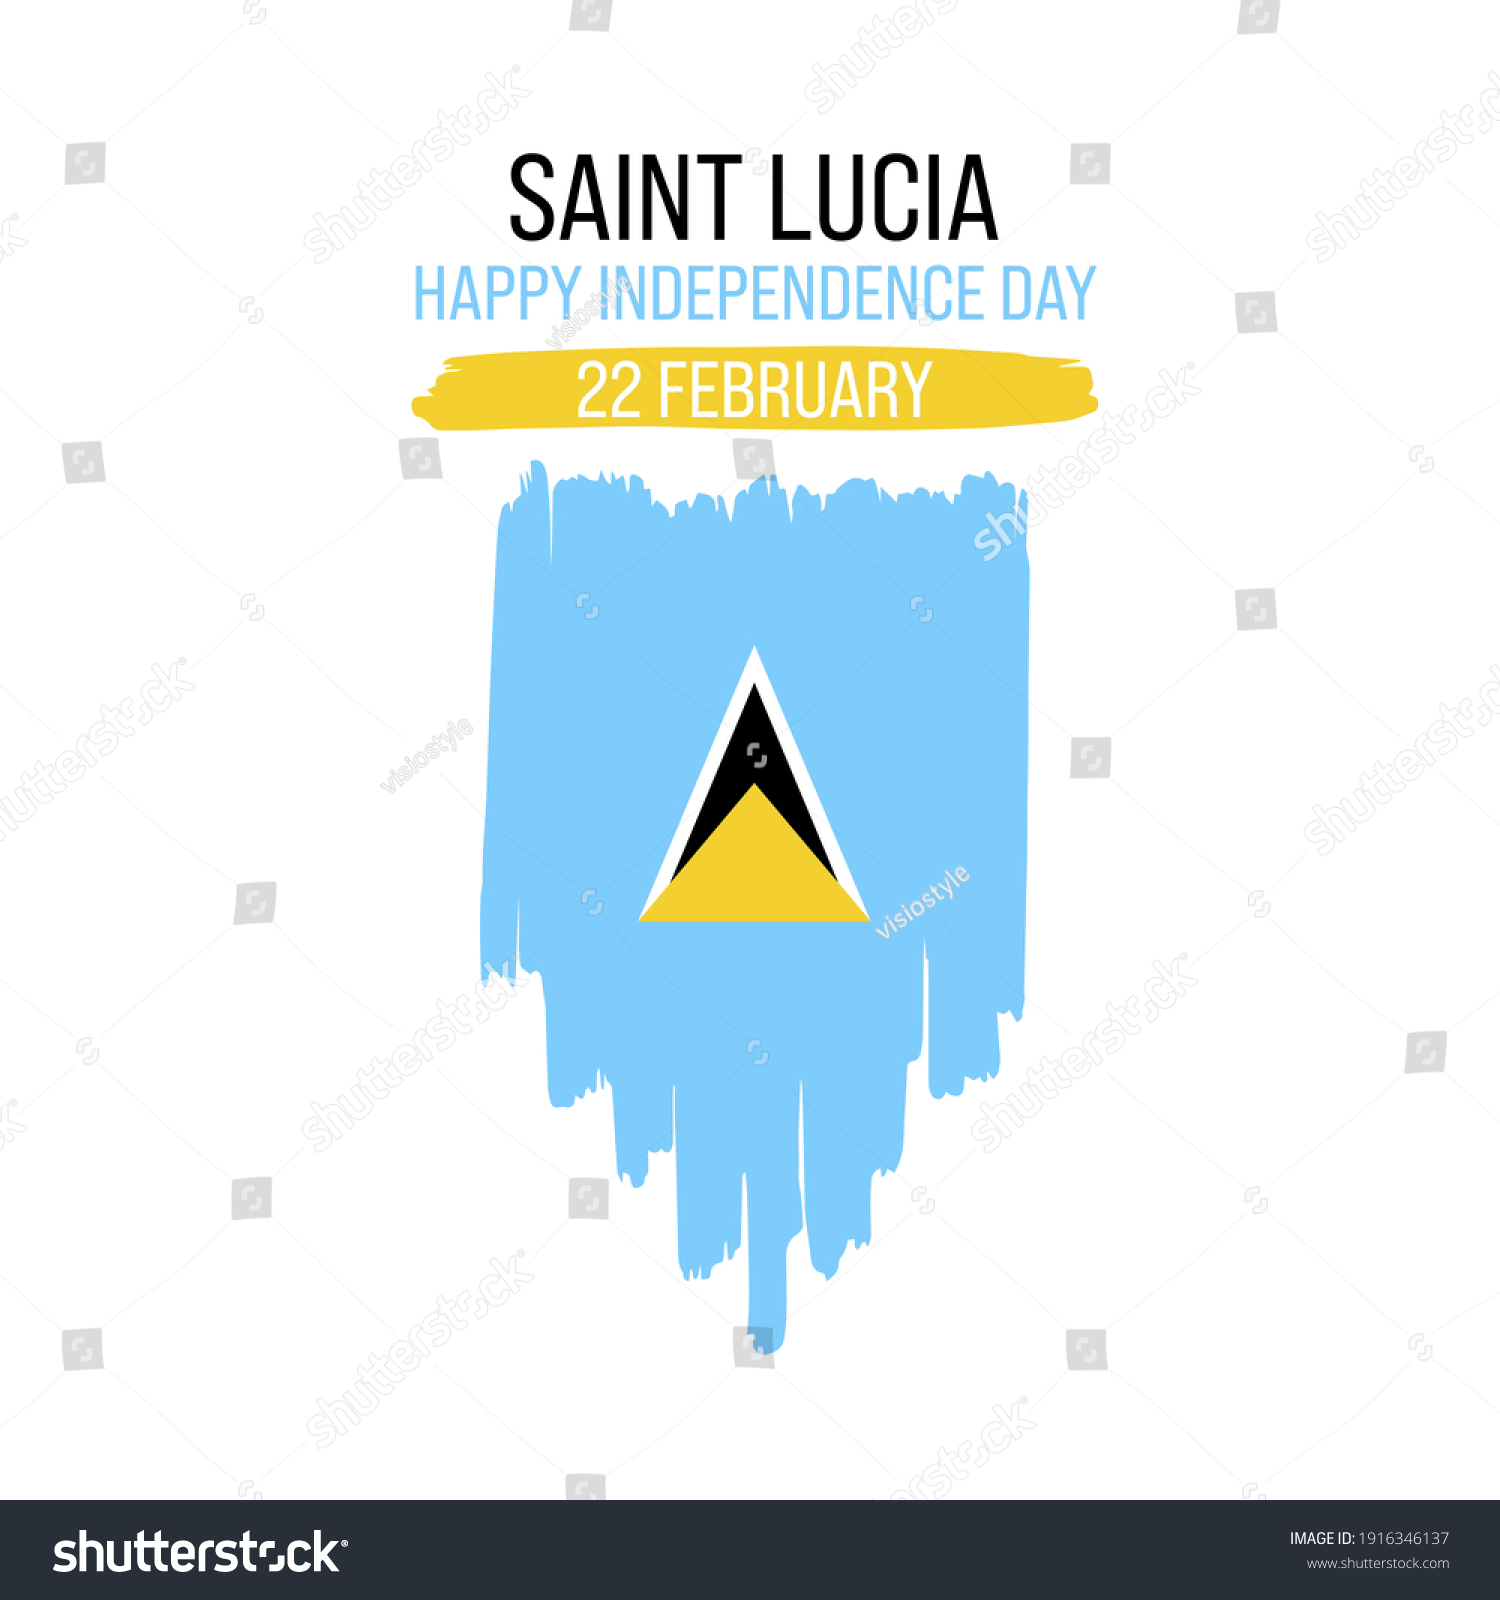 Saint Lucia Happy Independence day greeting card Royalty Free Stock